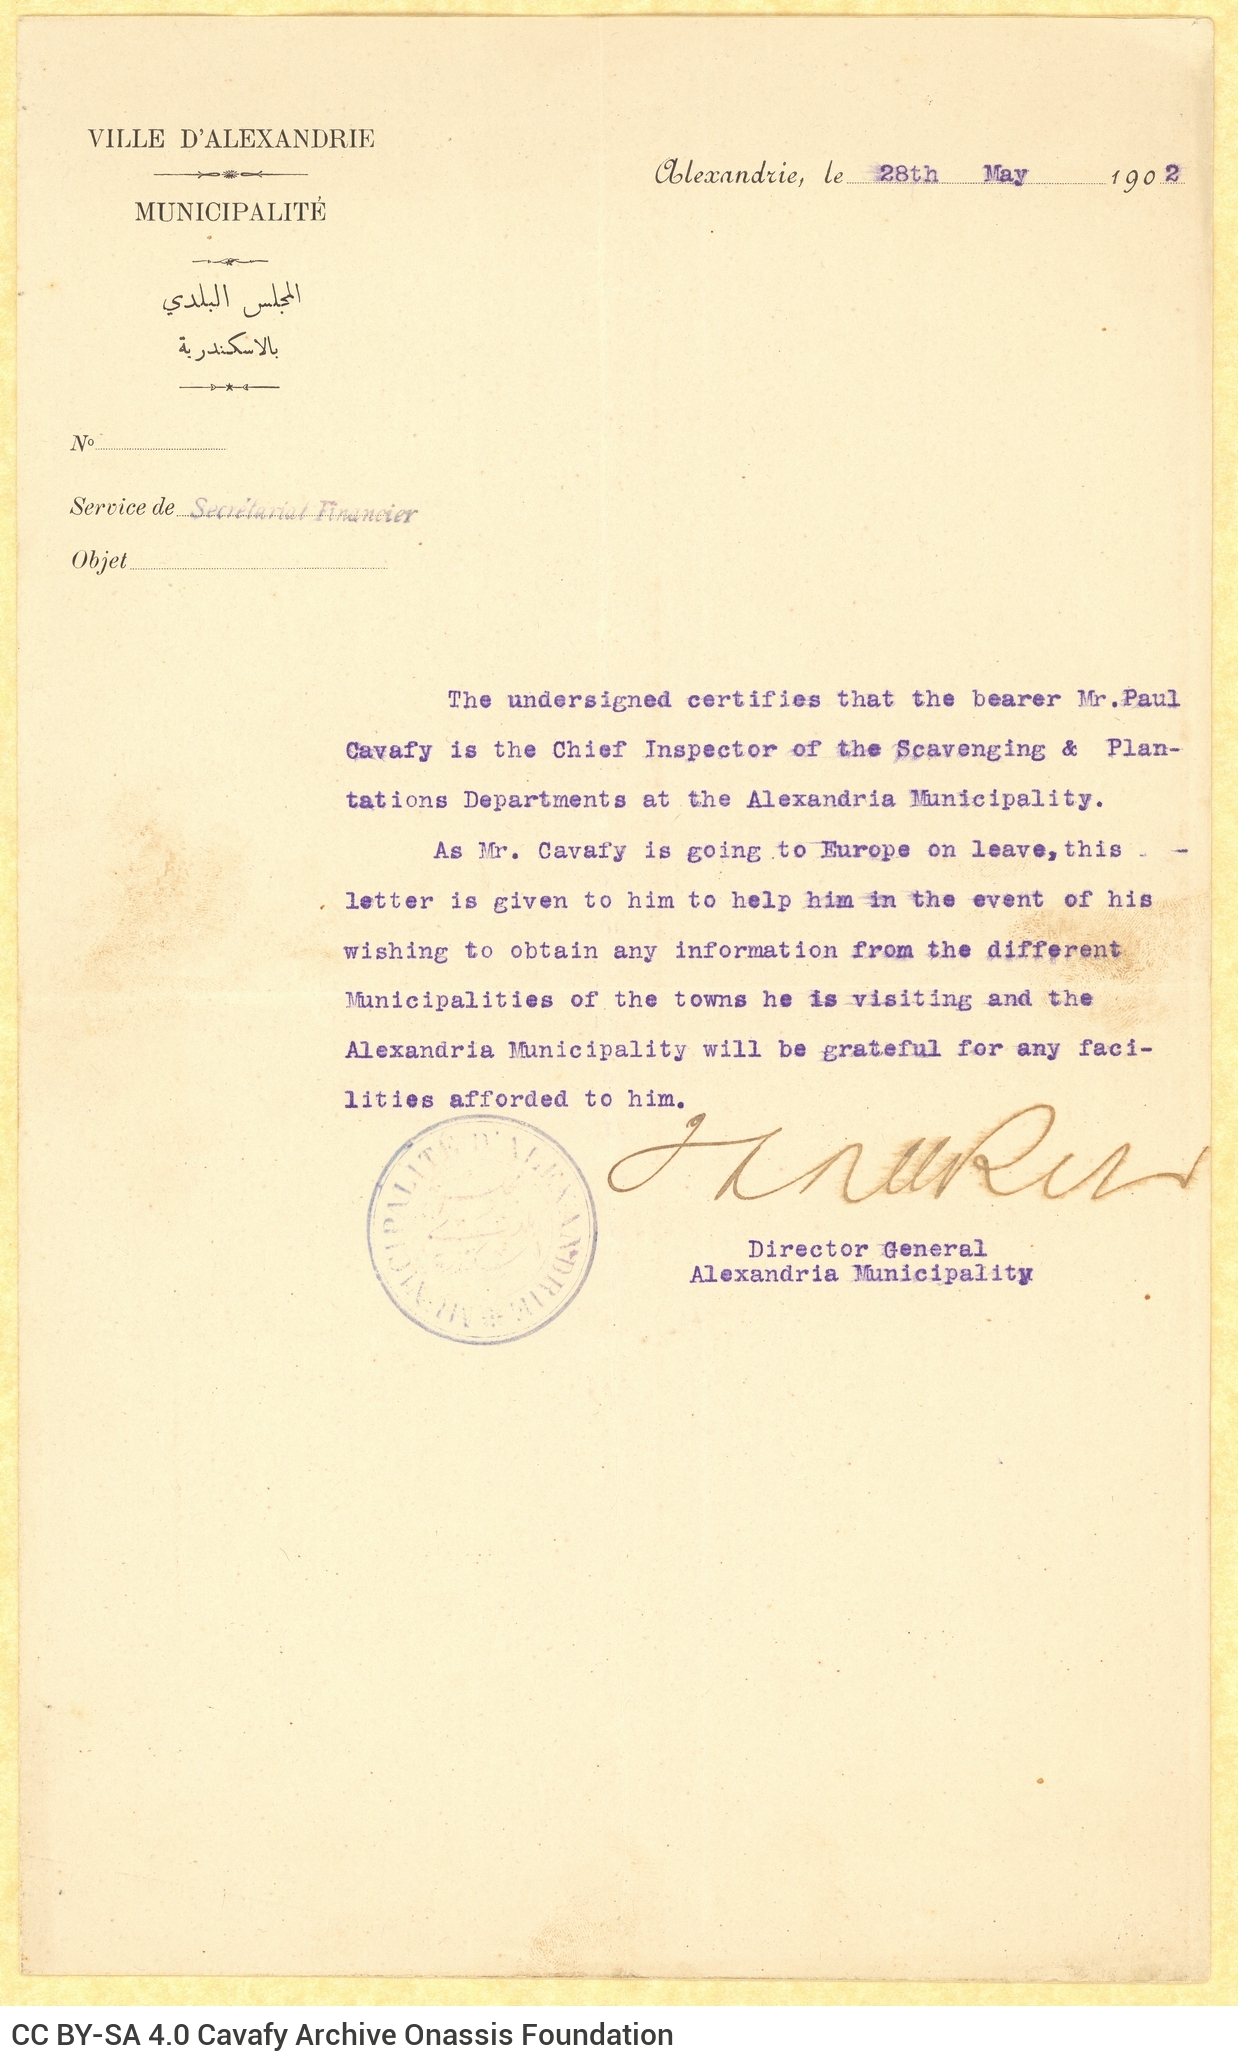 Typewritten official letter by the Director General of the Municipality of Alexandria (illegible signature), on the first pag